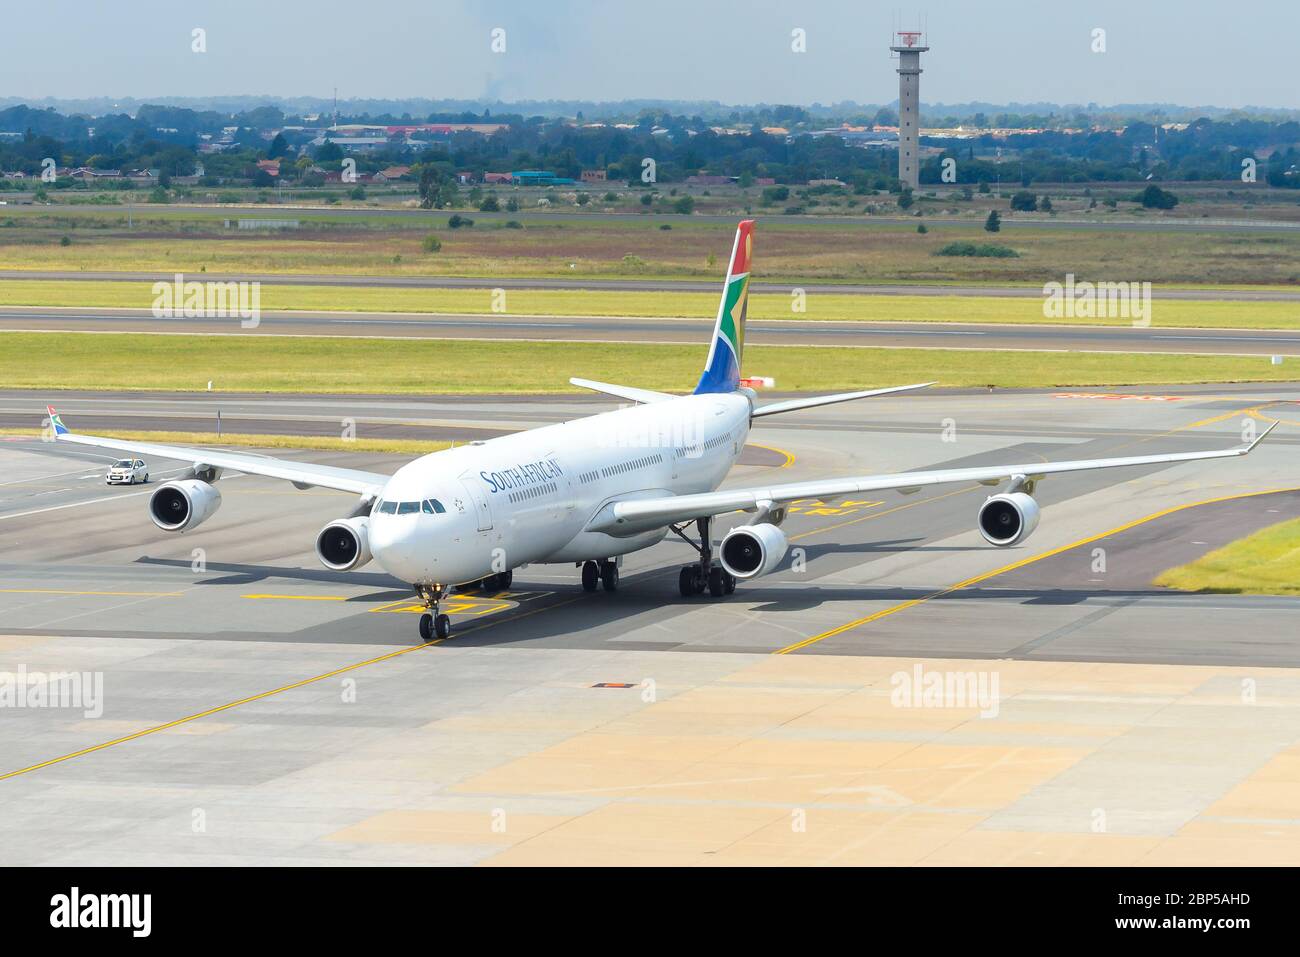 South African Airways Airbus A340 at O. R. Tambo airport. Airline in financial trouble without government aid. A340-300 aircraft registered as ZS-SXG. Stock Photo